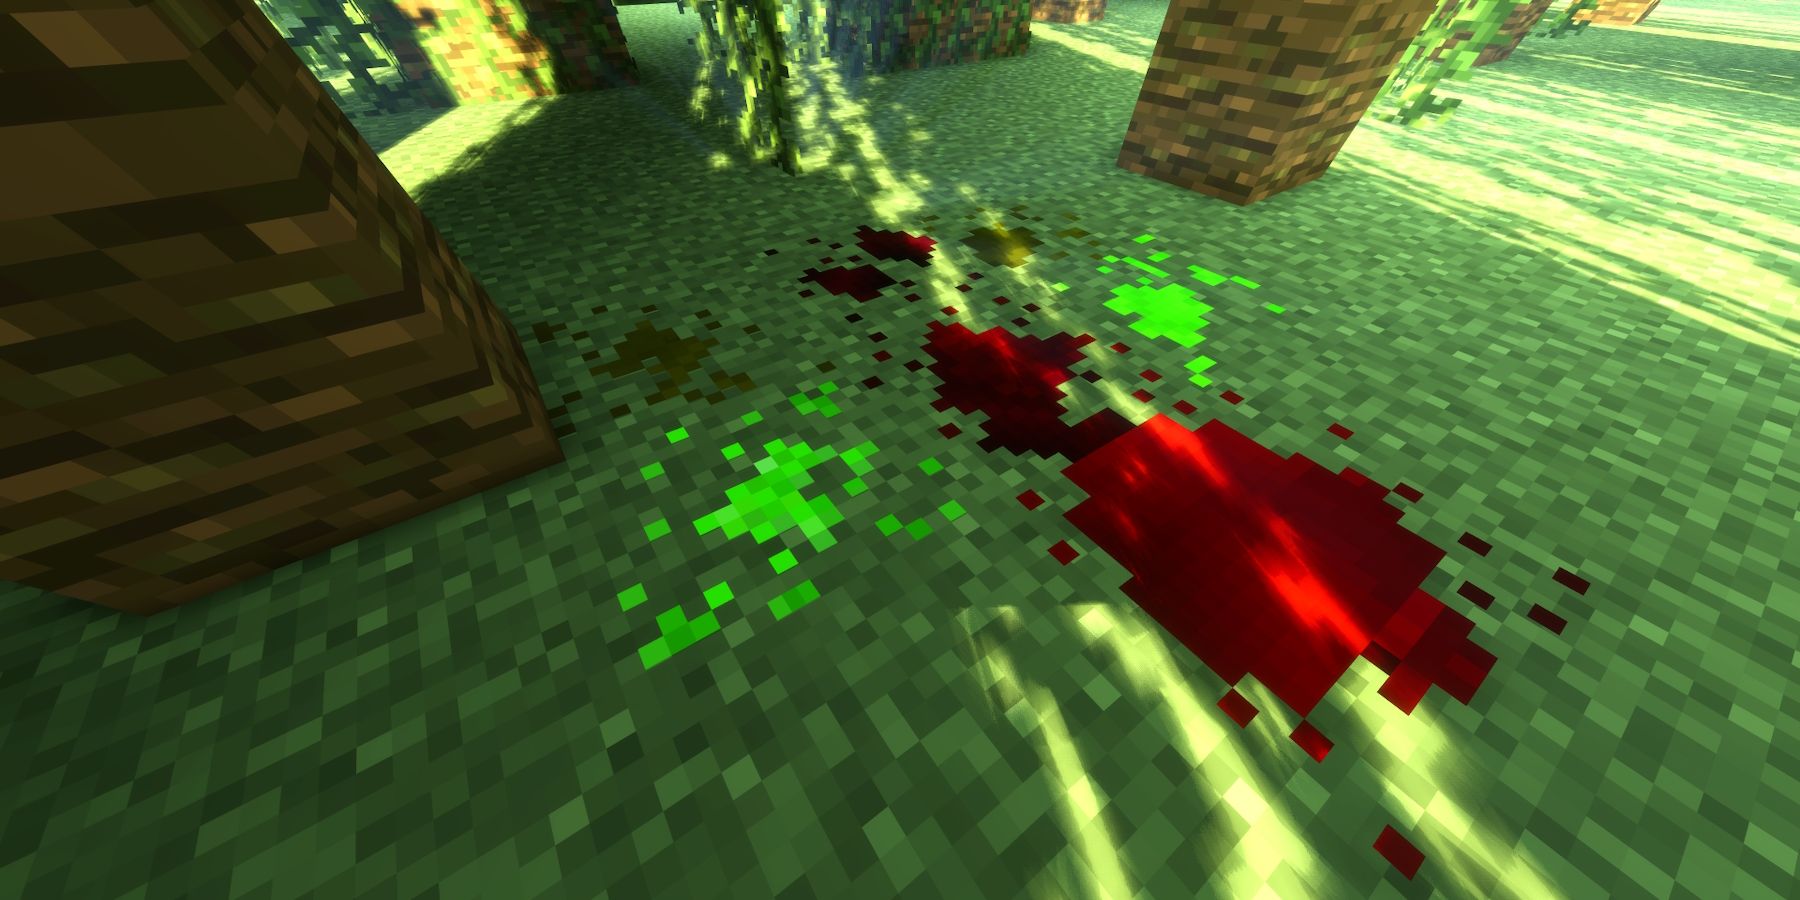 Horror Elements Mod for Minecraft